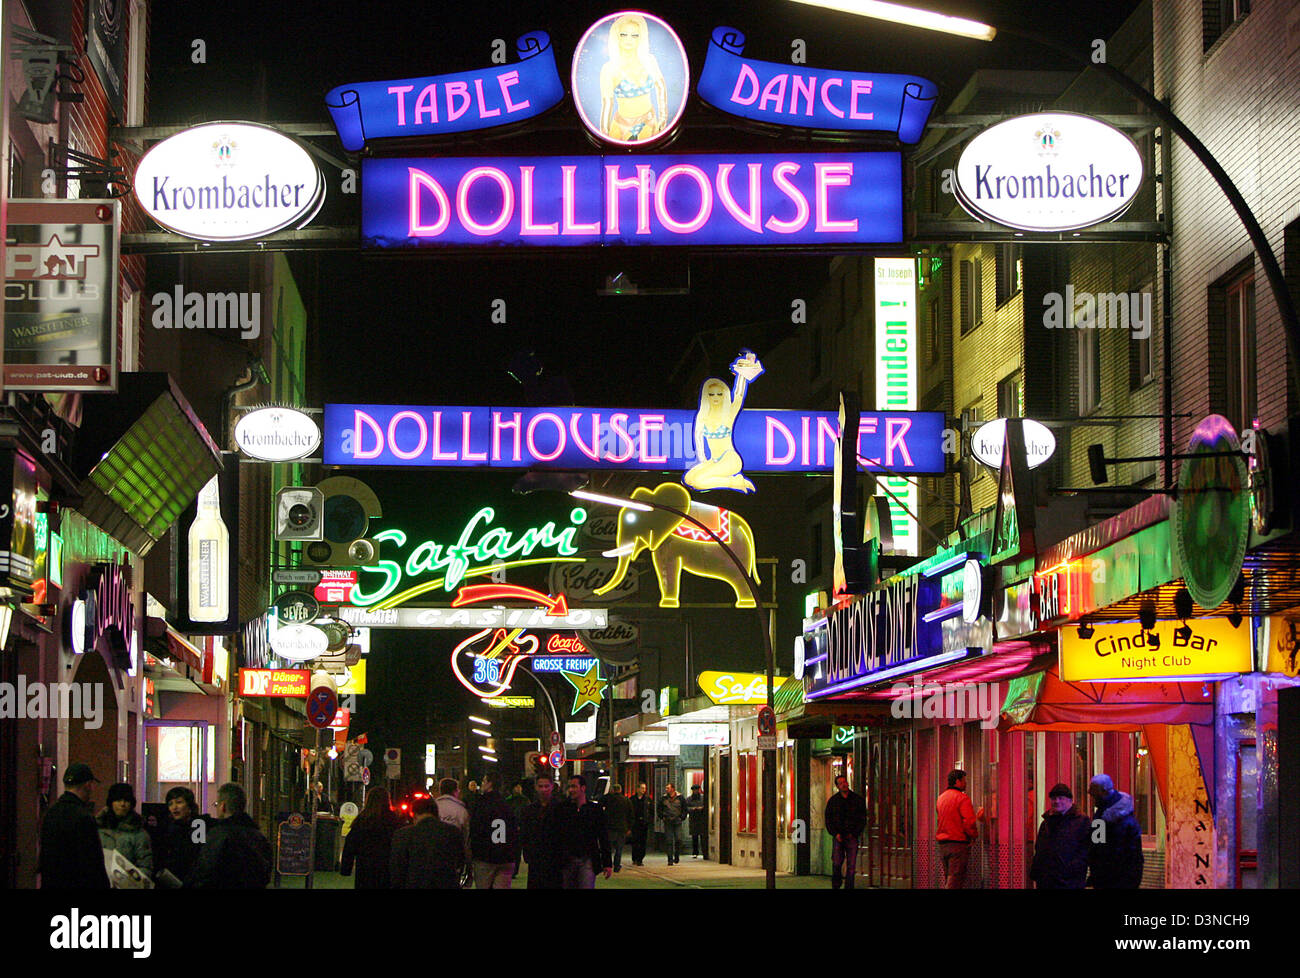 Pedestrians walk underneath colourful neon-lit signs advertising adult entertainment clubs on the famous Reeperbahn amusement street in Hamburg, Germany, Tuesday night, 28 March 2006. The famous Reeperbahn is considered the longest amusement street in the world. Photo: Kay Nietfeld Stock Photo